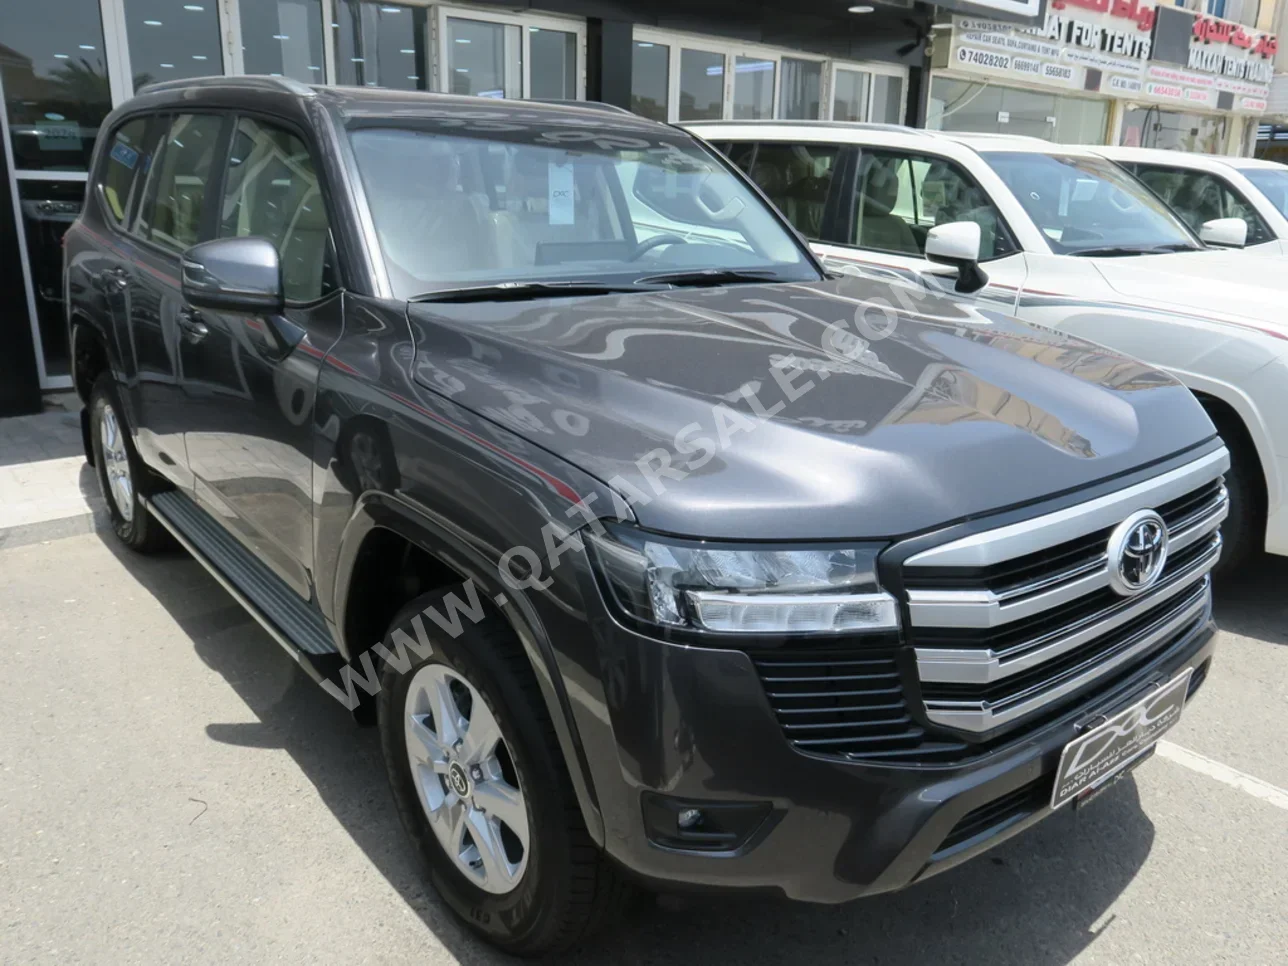 Toyota  Land Cruiser  GXR  2024  Automatic  0 Km  6 Cylinder  Four Wheel Drive (4WD)  SUV  Gray  With Warranty